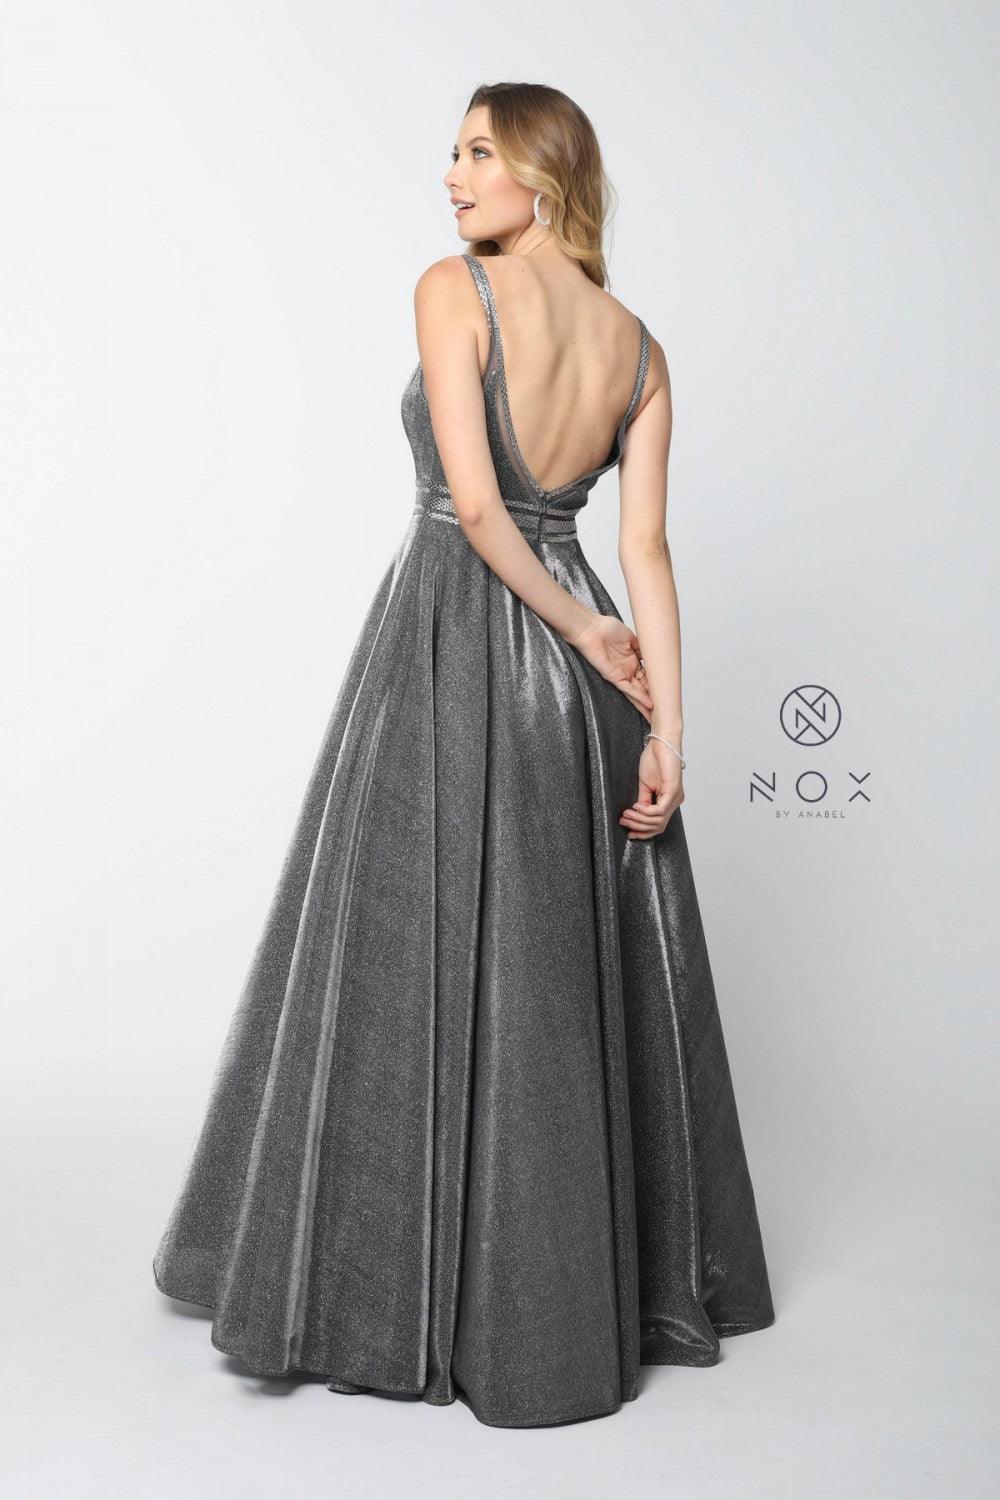 Long Formal Metallic Prom Dress Evening Gown - The Dress Outlet Nox Anabel